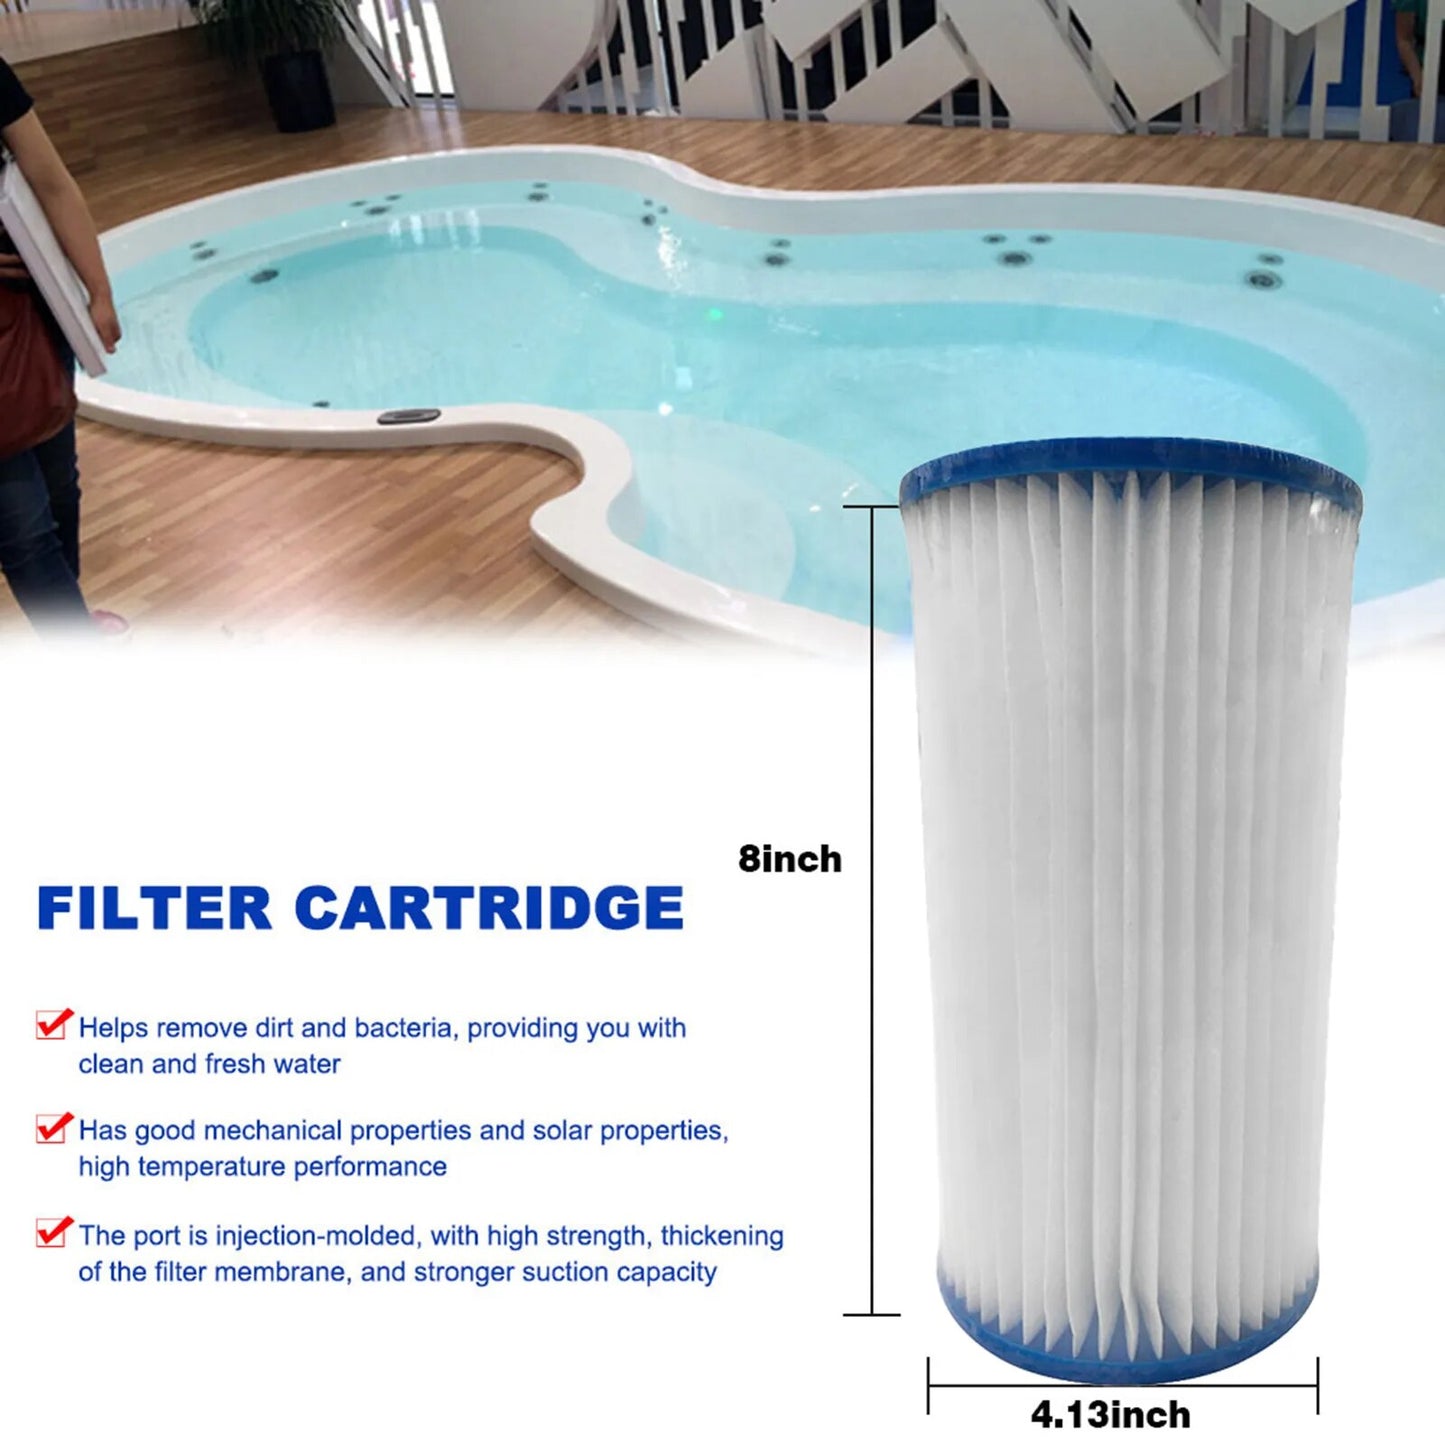 Swimming Pool Equipment Type A or Type C Filter Cartridge Pool Replacement Filter Cartridge for Swimming Pool Daily Care